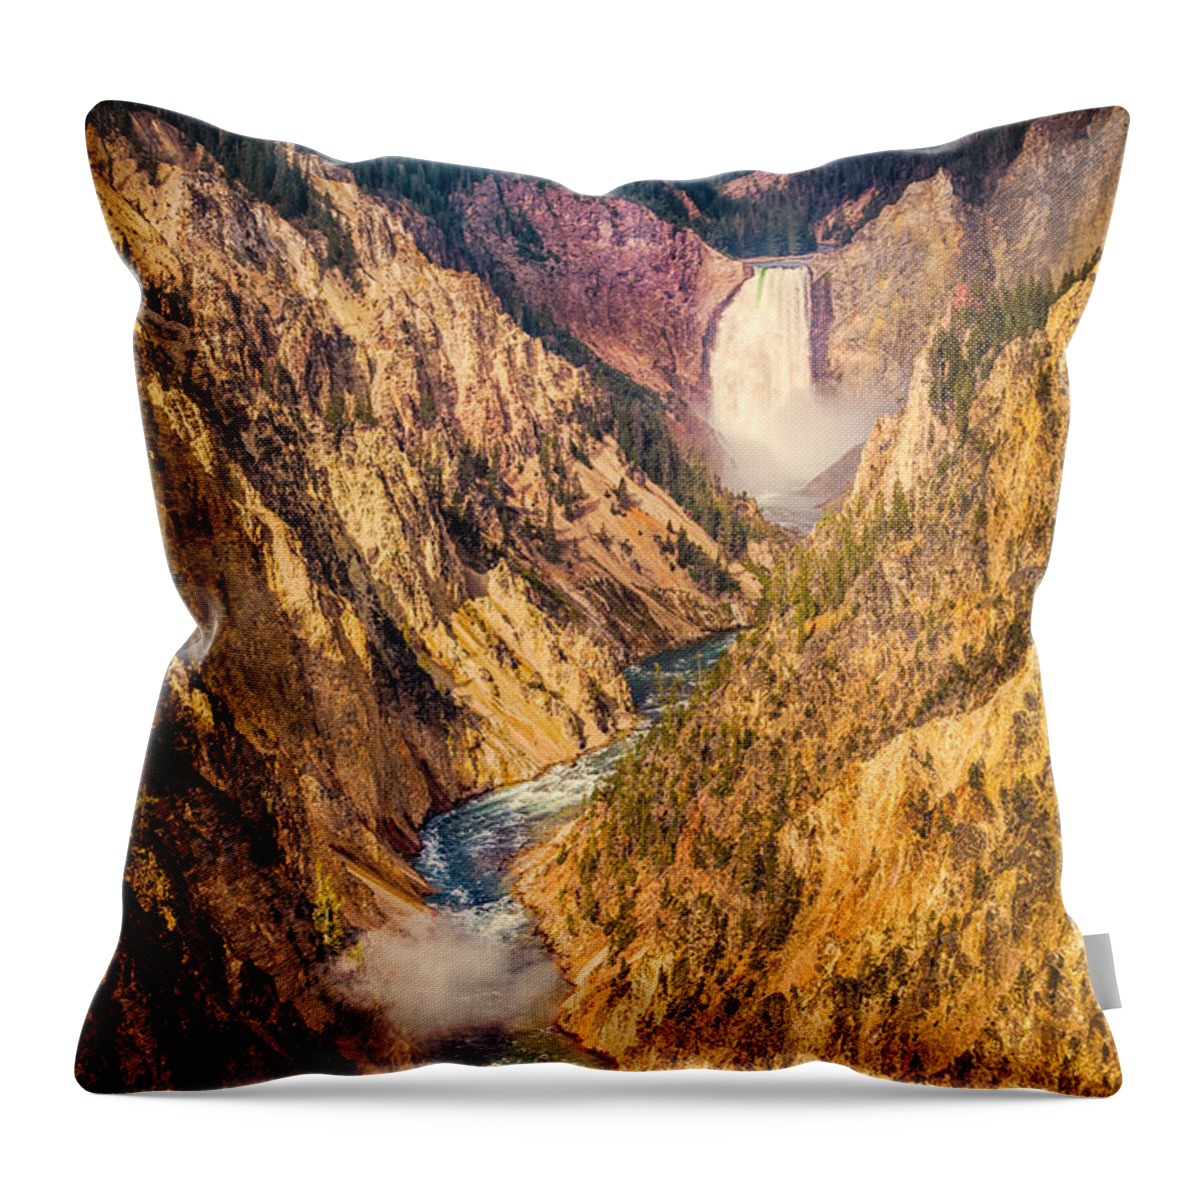 Flowing Throw Pillow featuring the photograph Lower Falls - Yellowstone by Rikk Flohr